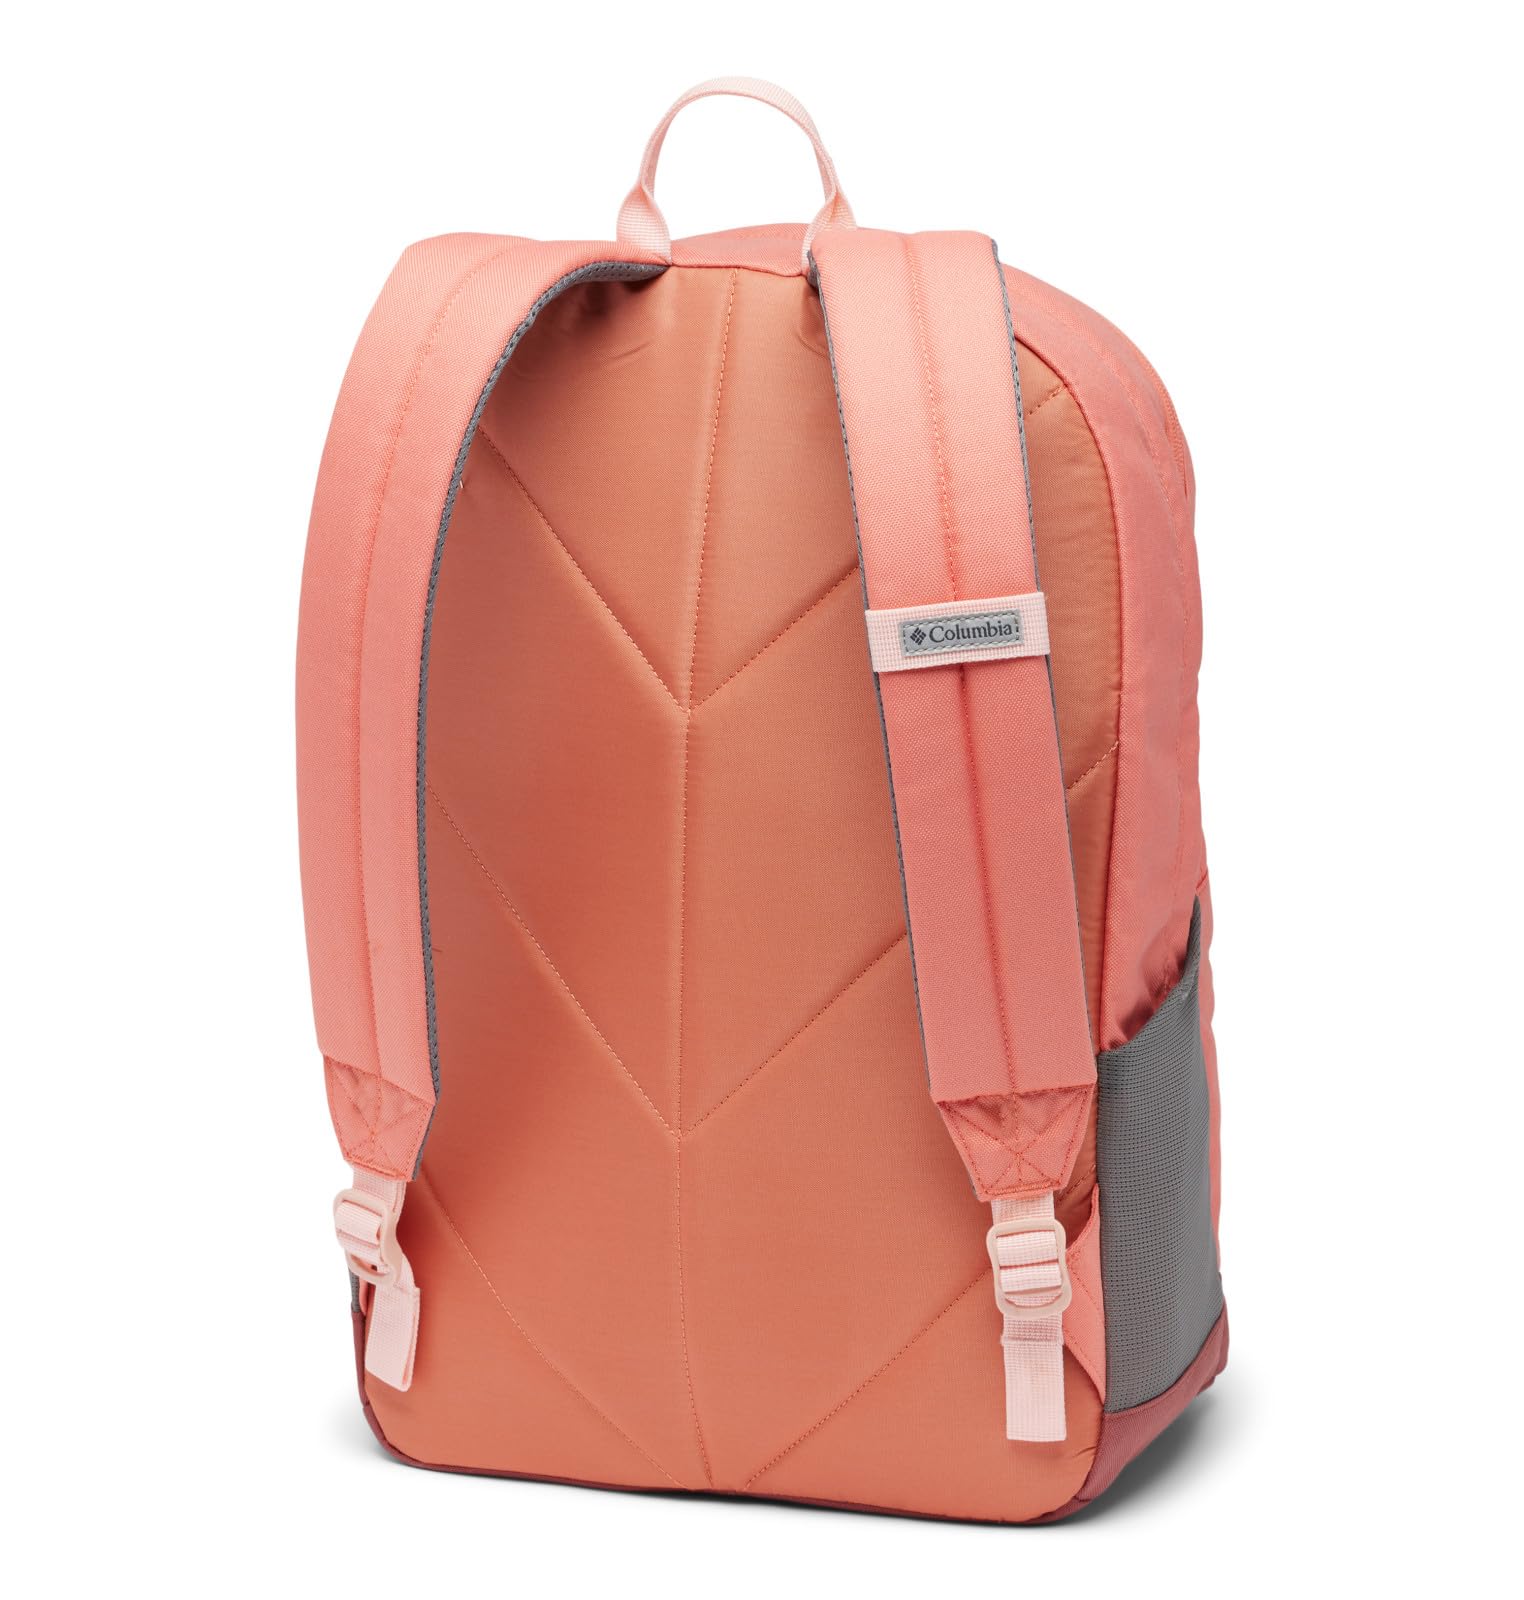 Columbia Unisex Zigzag 30L Backpack, Faded Peach/Beetroot, One Size